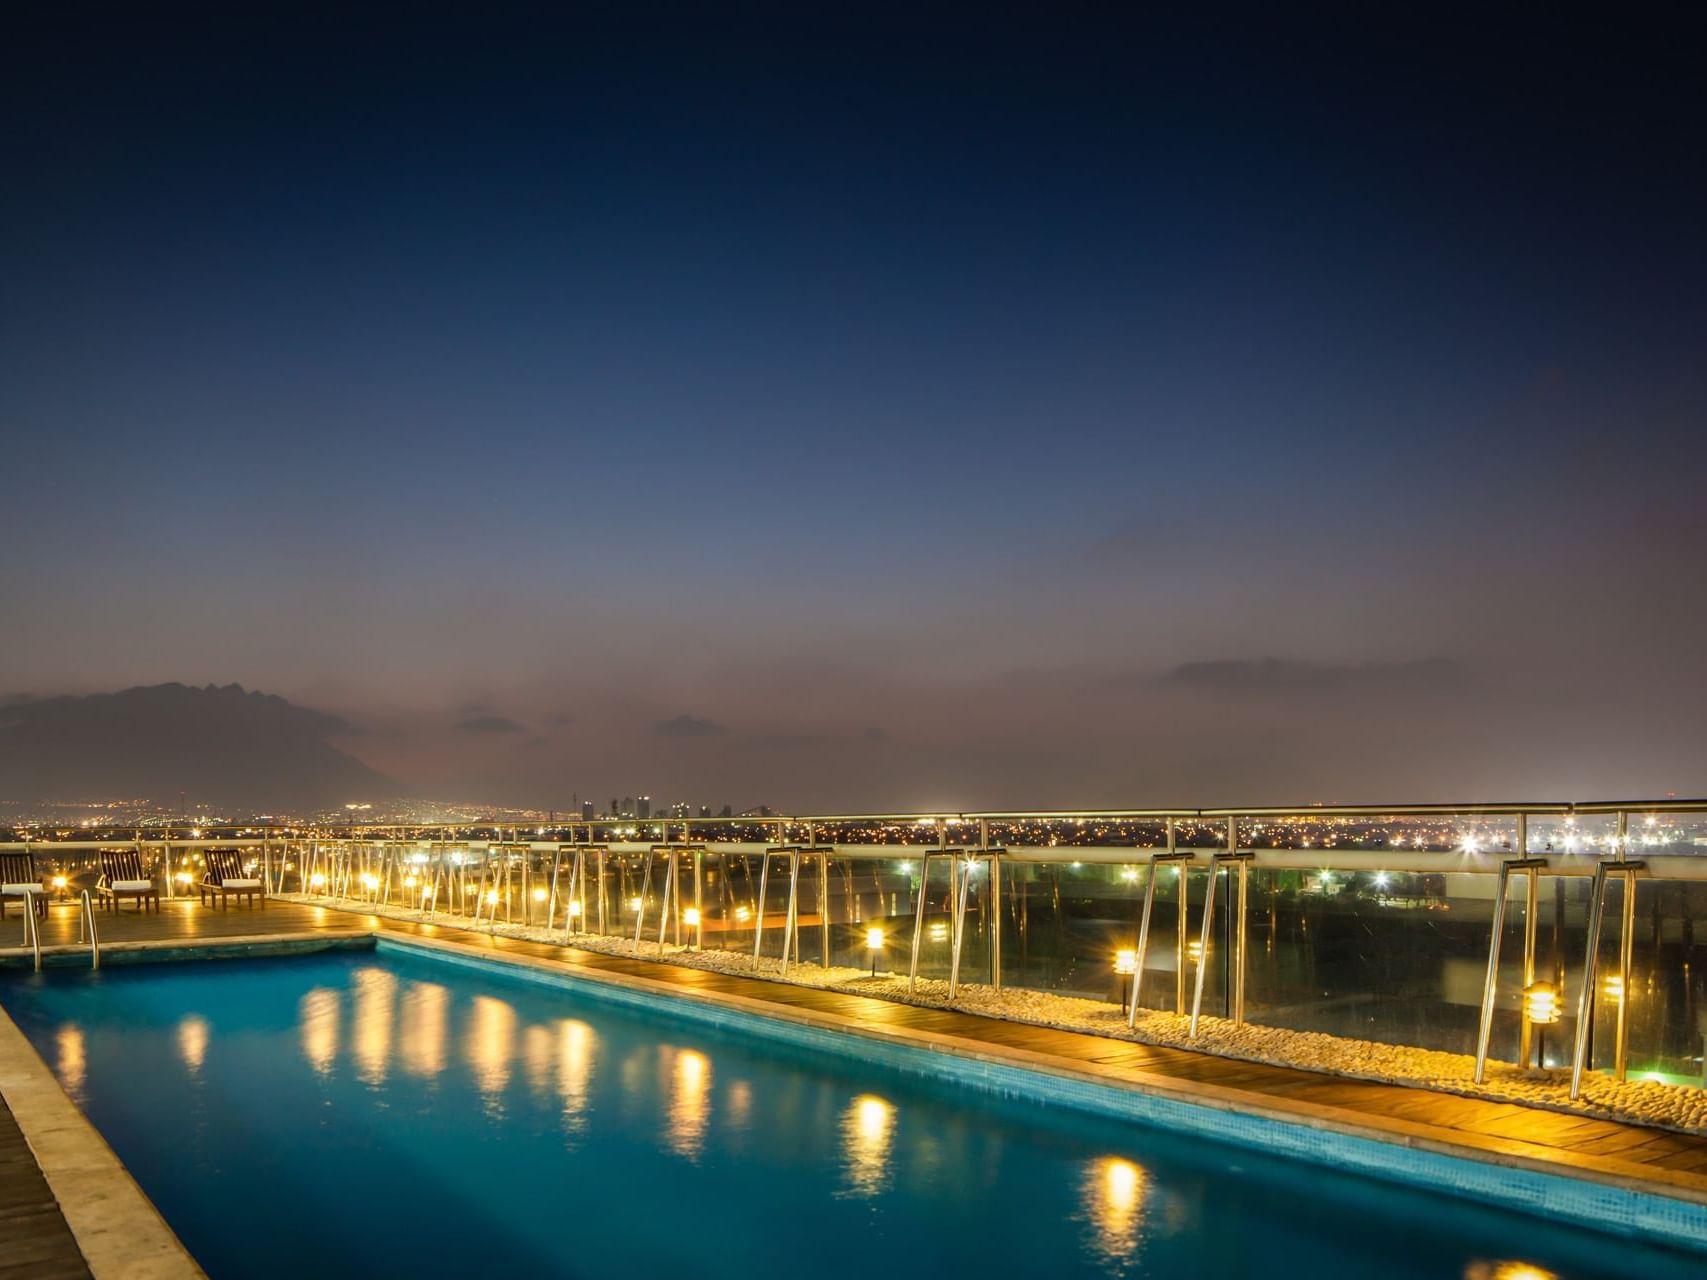 Night view of the Rooftop pool area at Fiesta Inn Hotels